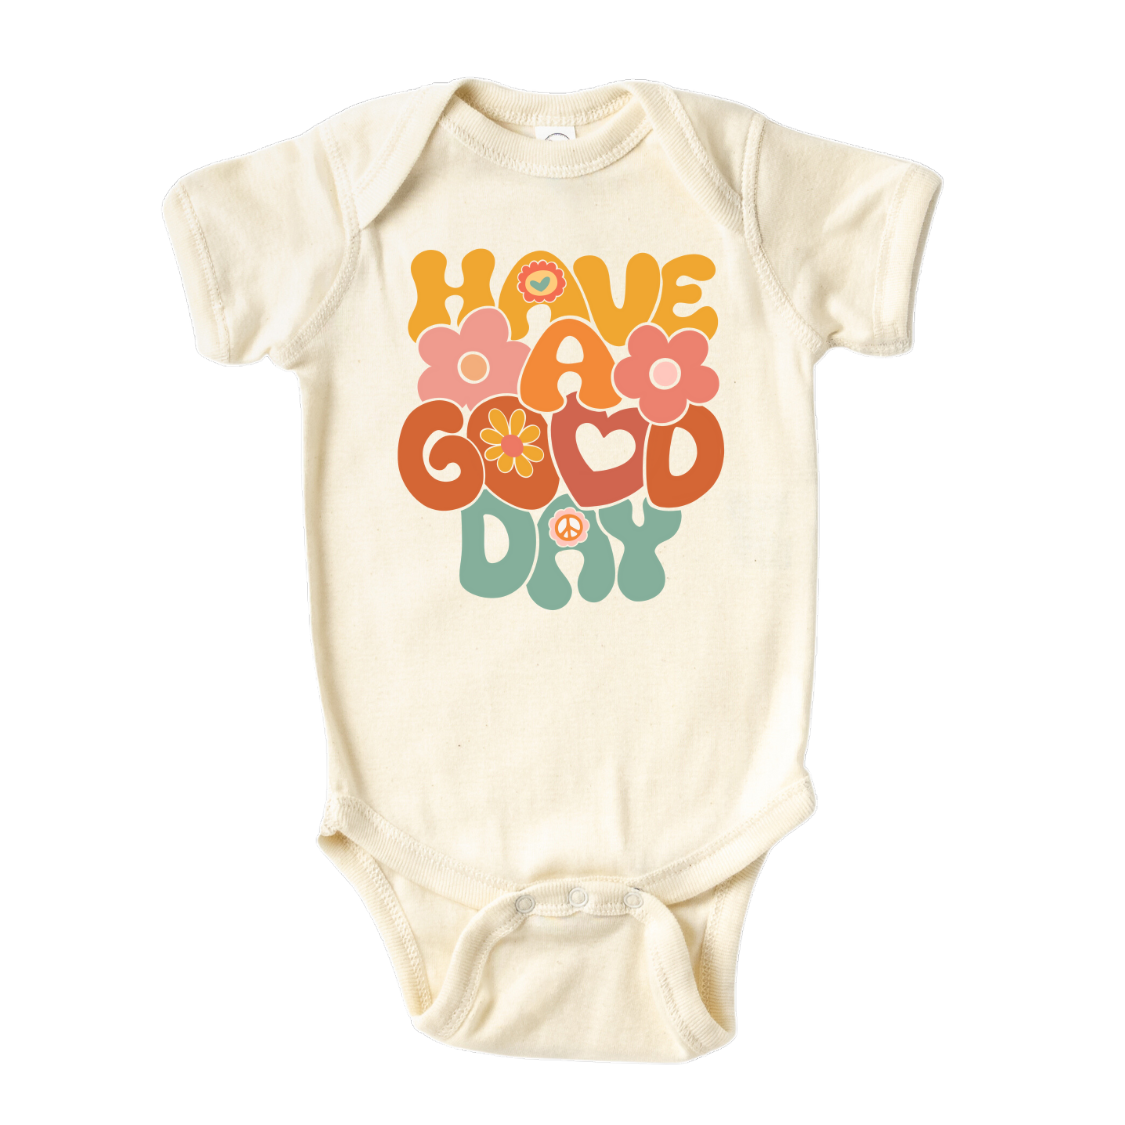 Cute Shirt Baby Onesie® Have A Good Day Baby Shower Gift Newborn Clothes